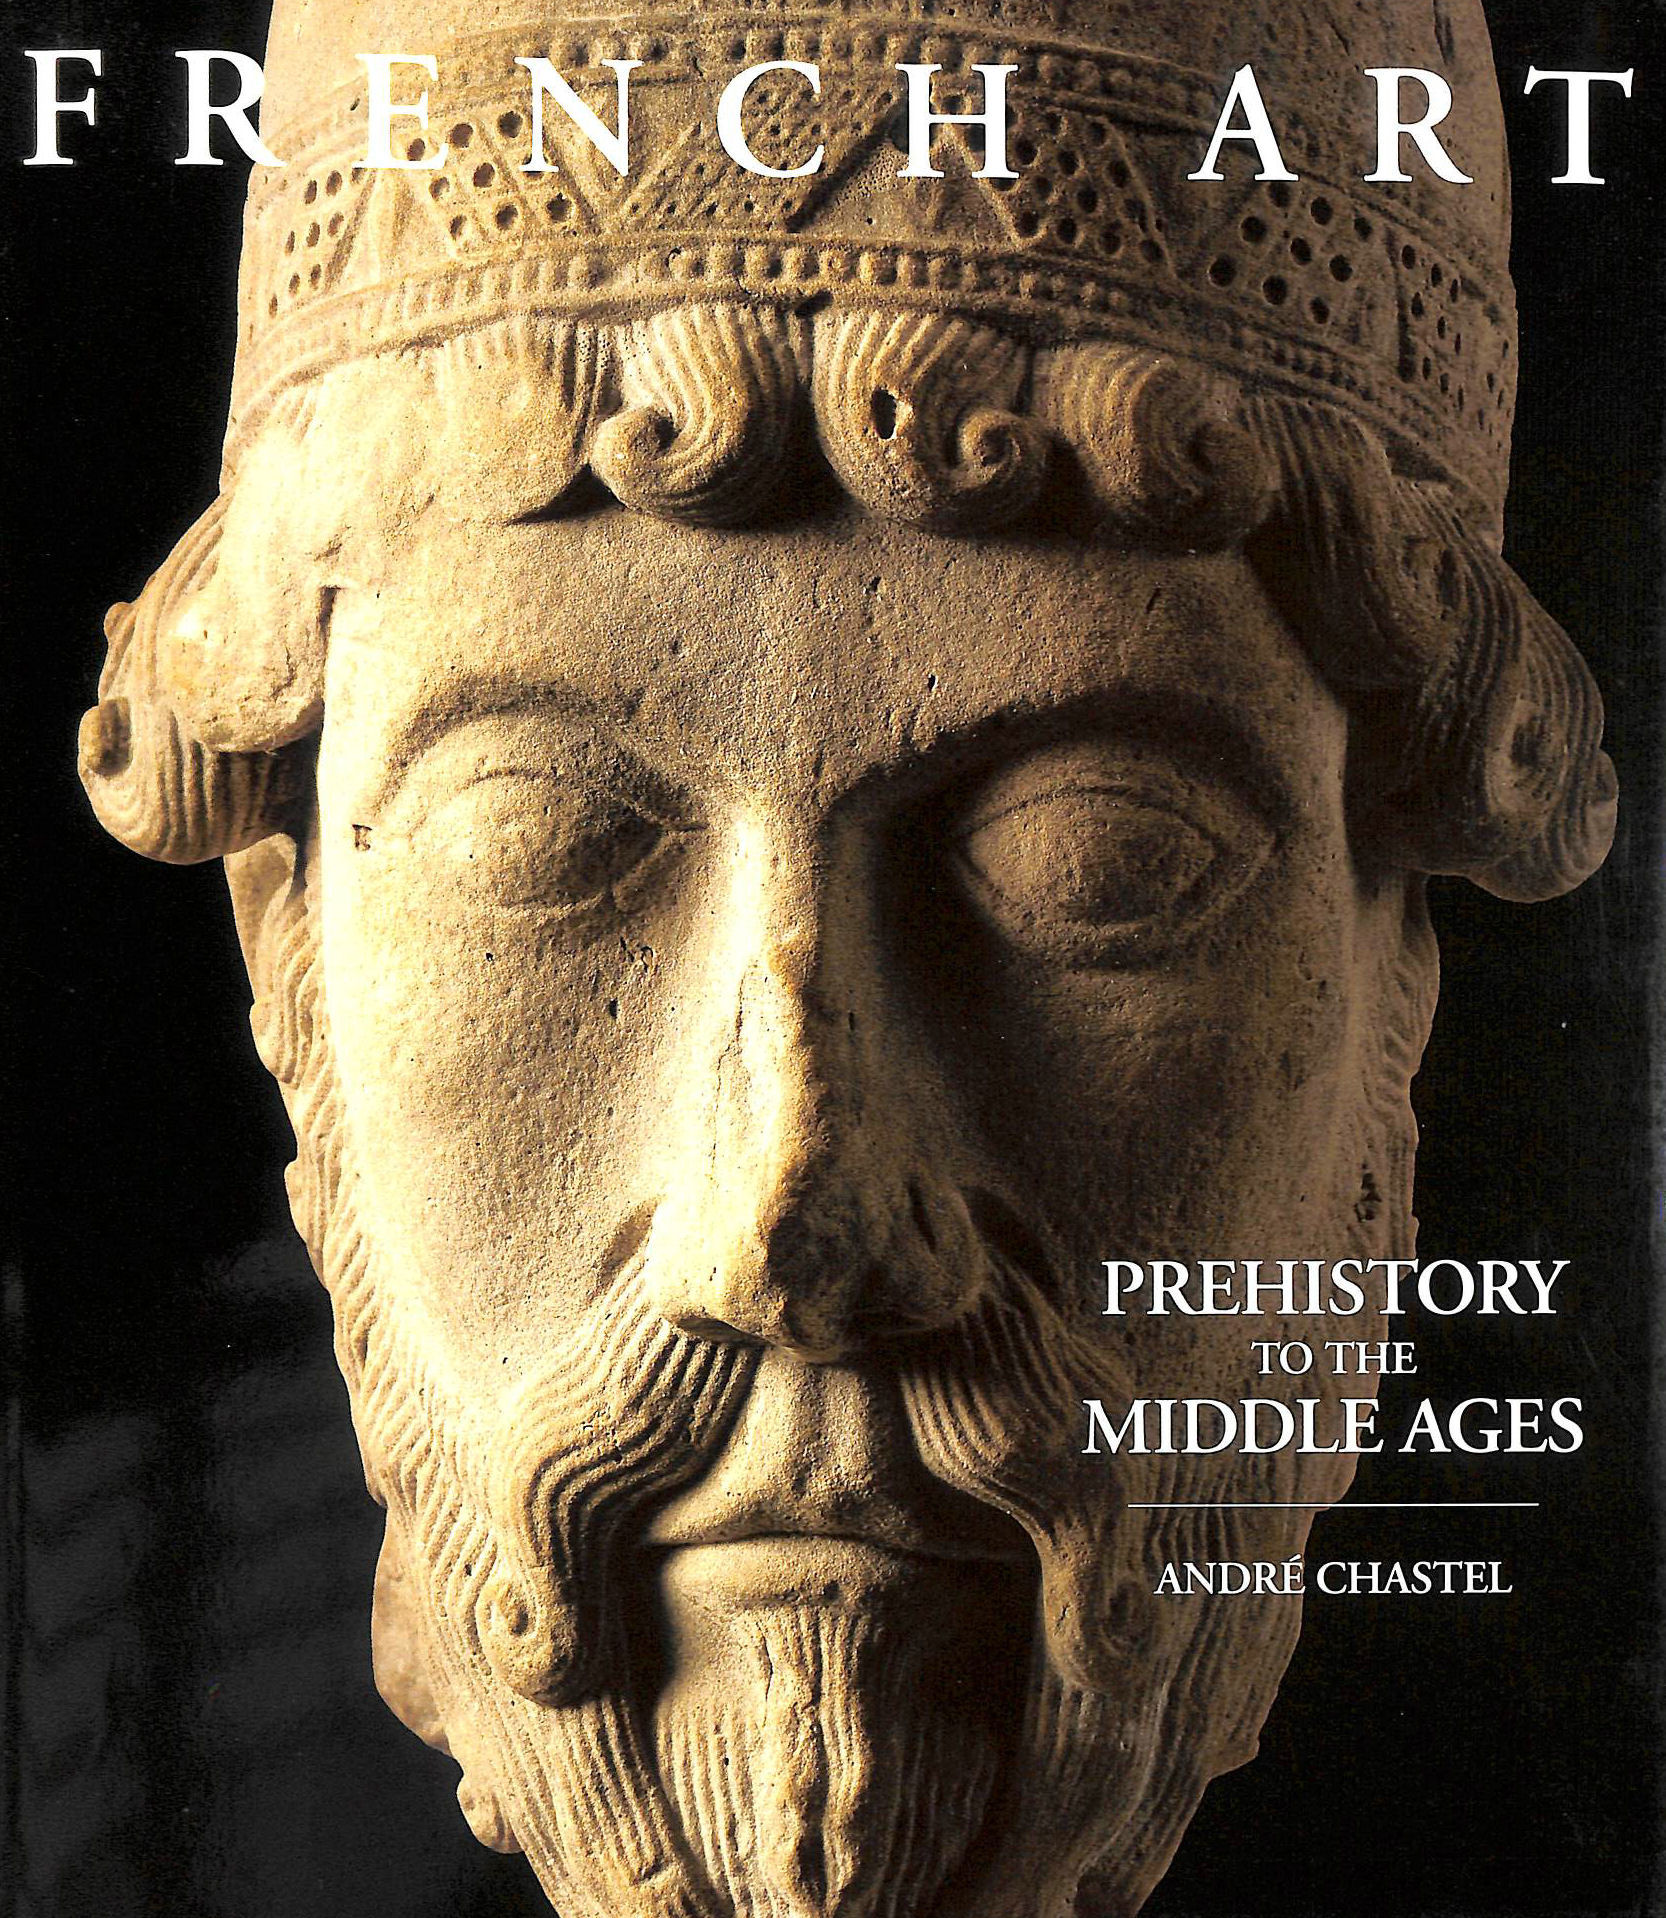 CHASTEL, ANDRE - Prehistory to the Middle Ages (French Art)